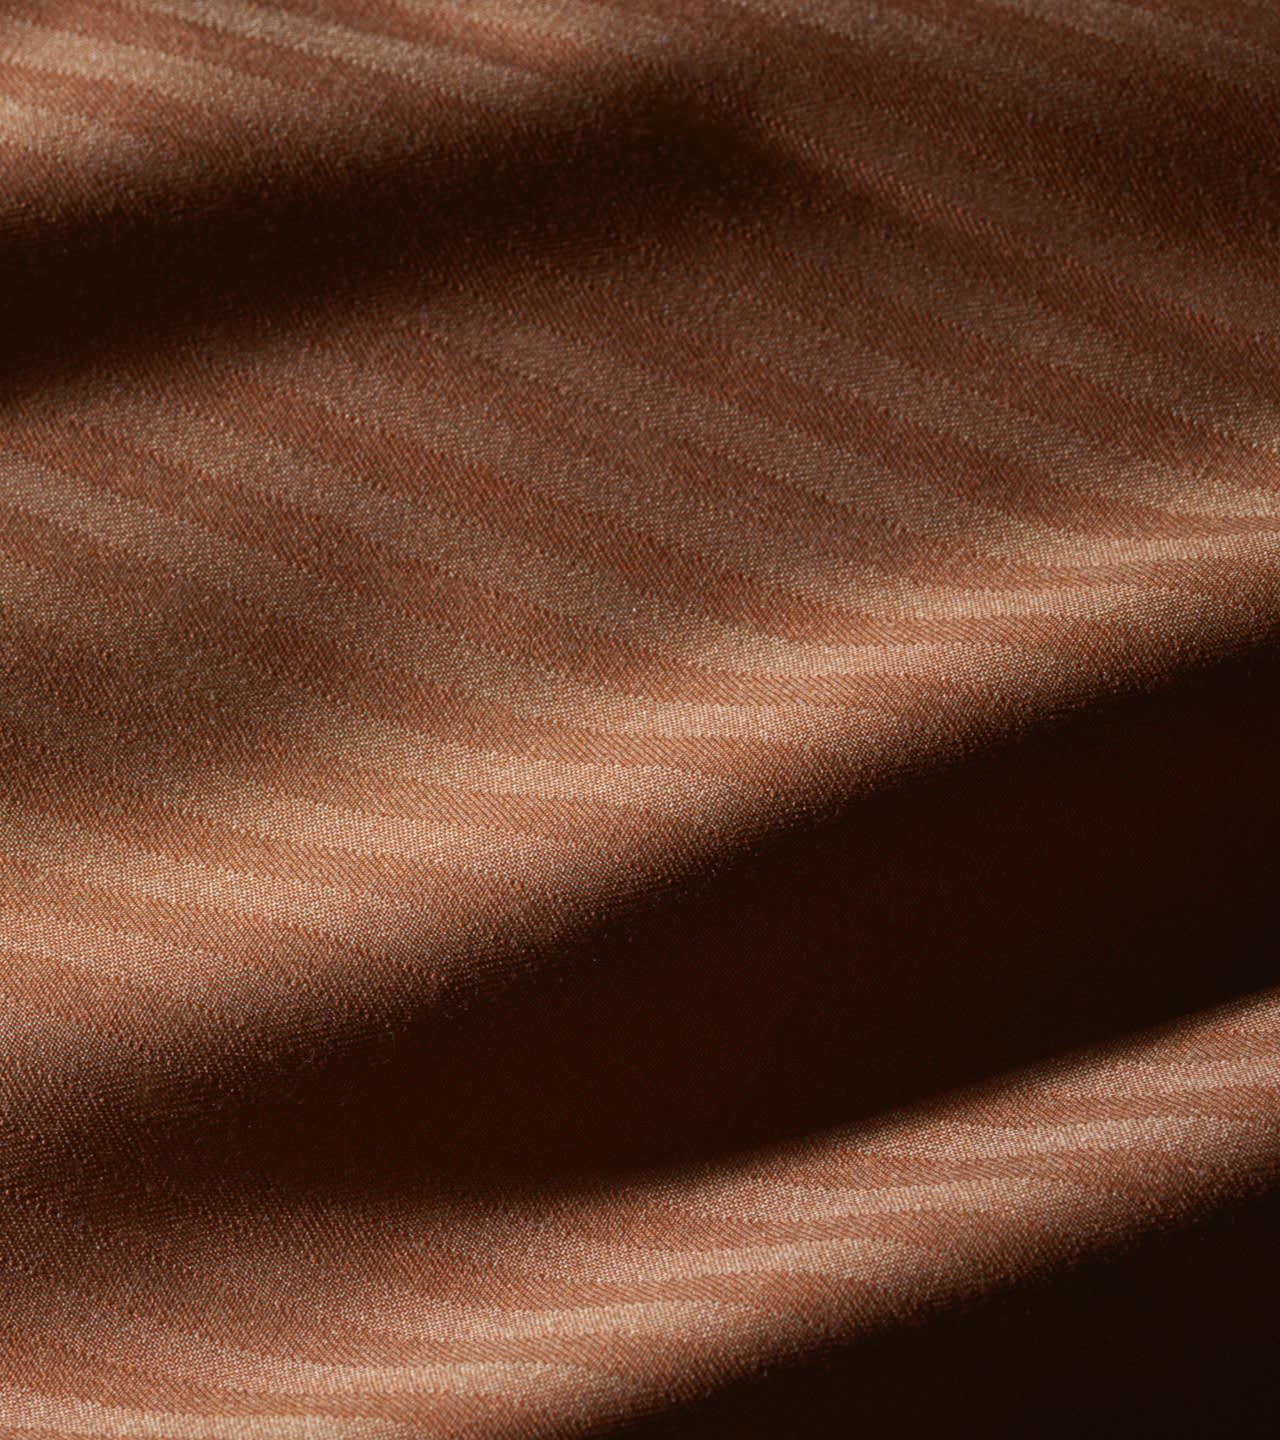 A light brown wool and silk fabric from the Brioni Bespoke selection